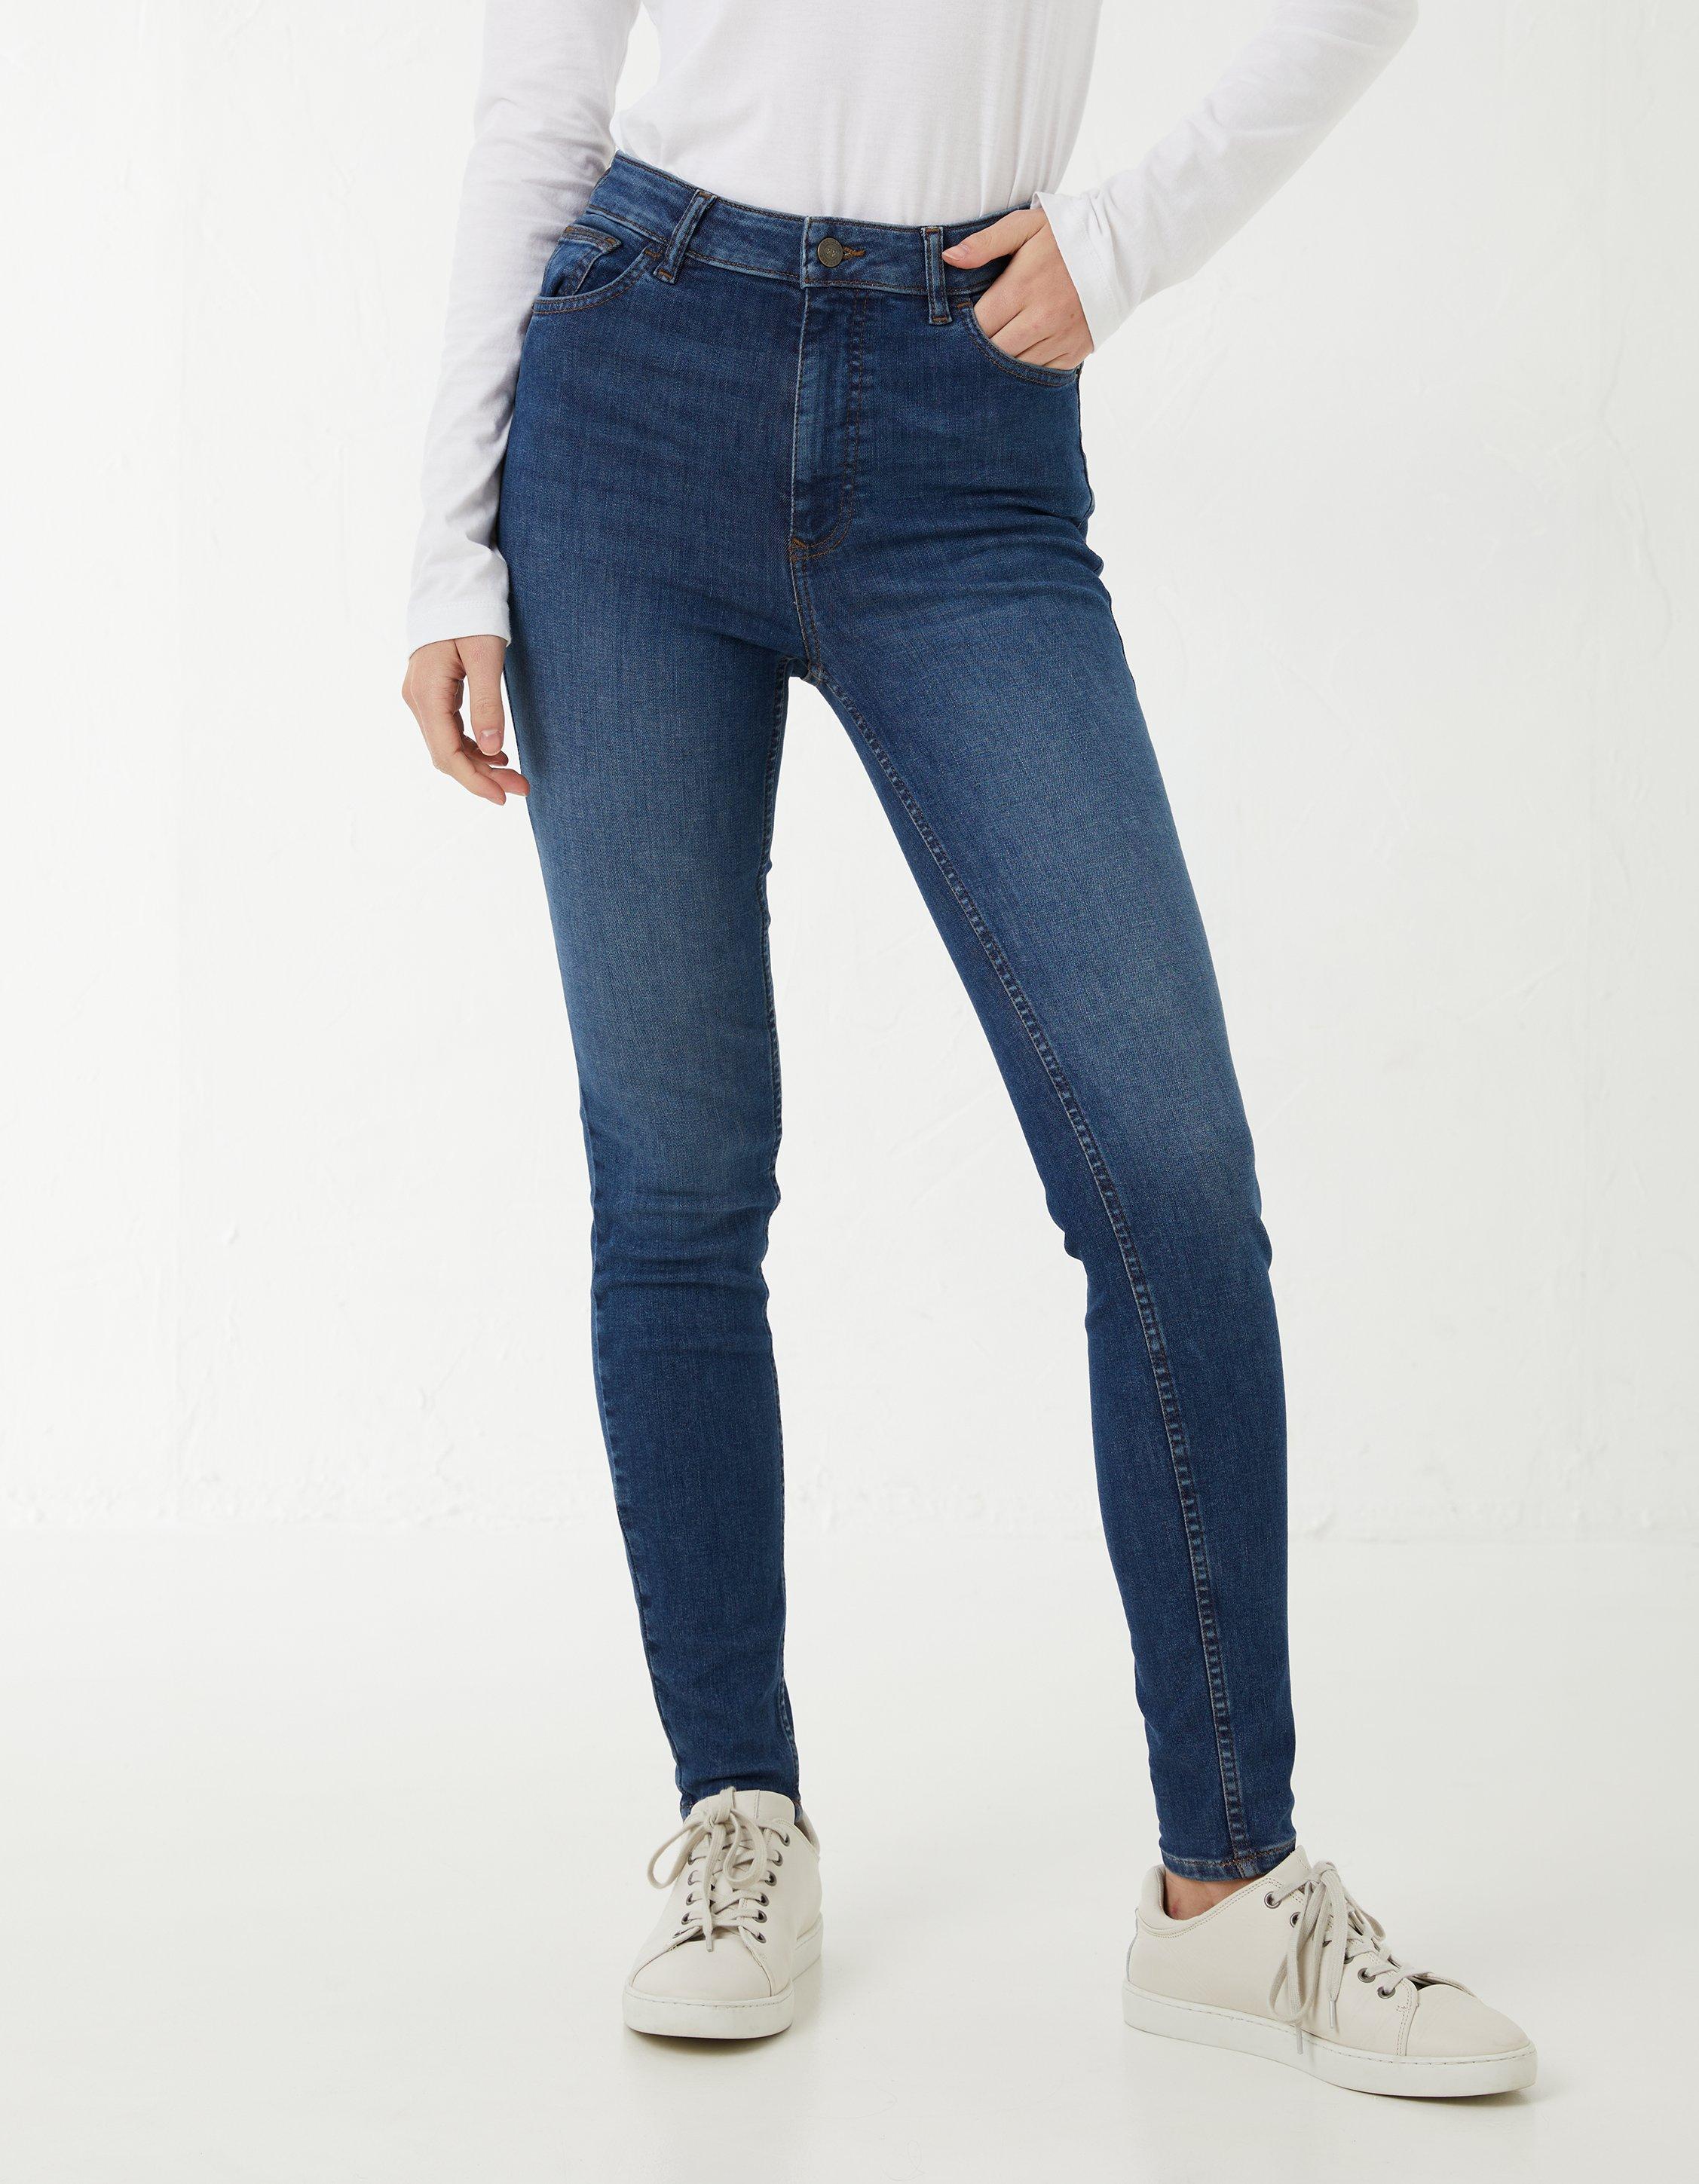 Harlow High Waist Stretch Skinny Jeans, Jeans & Dungarees | FatFace.com